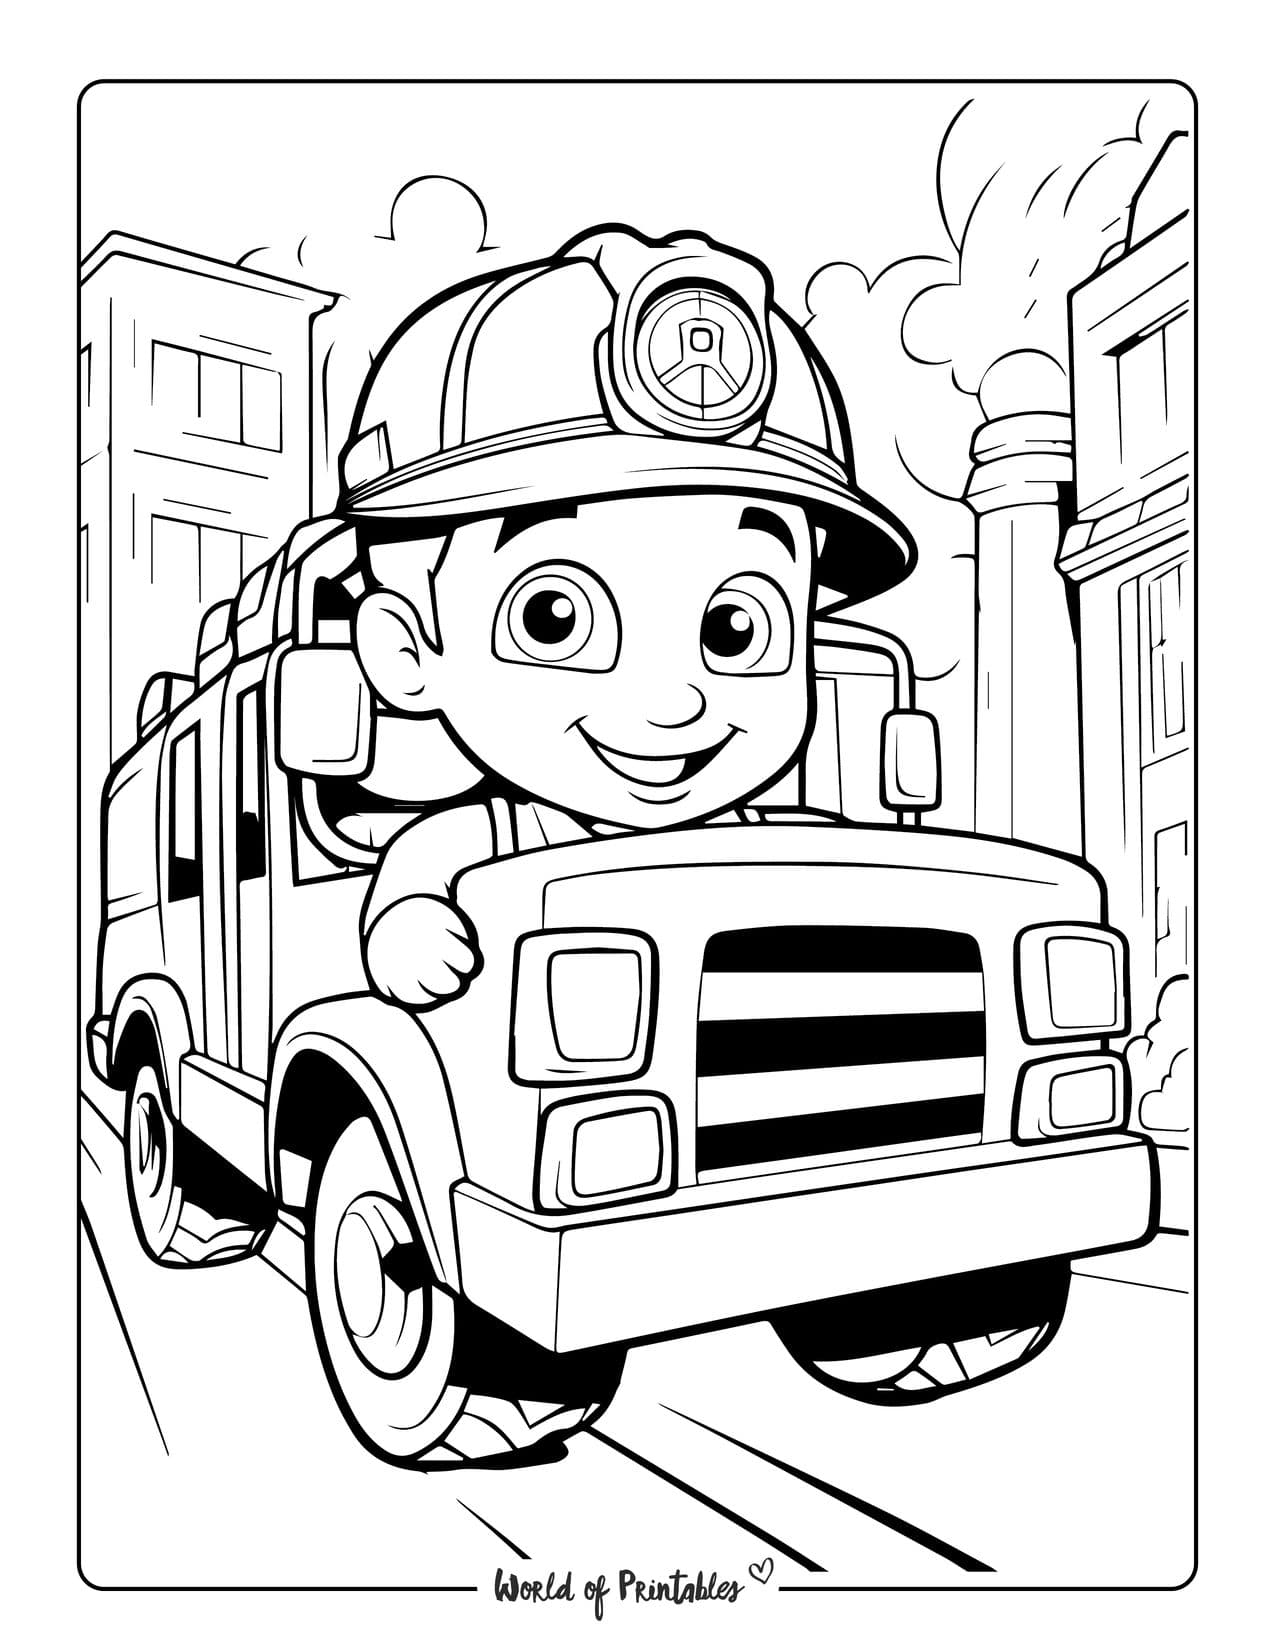 Fire truck coloring pages for kids adults